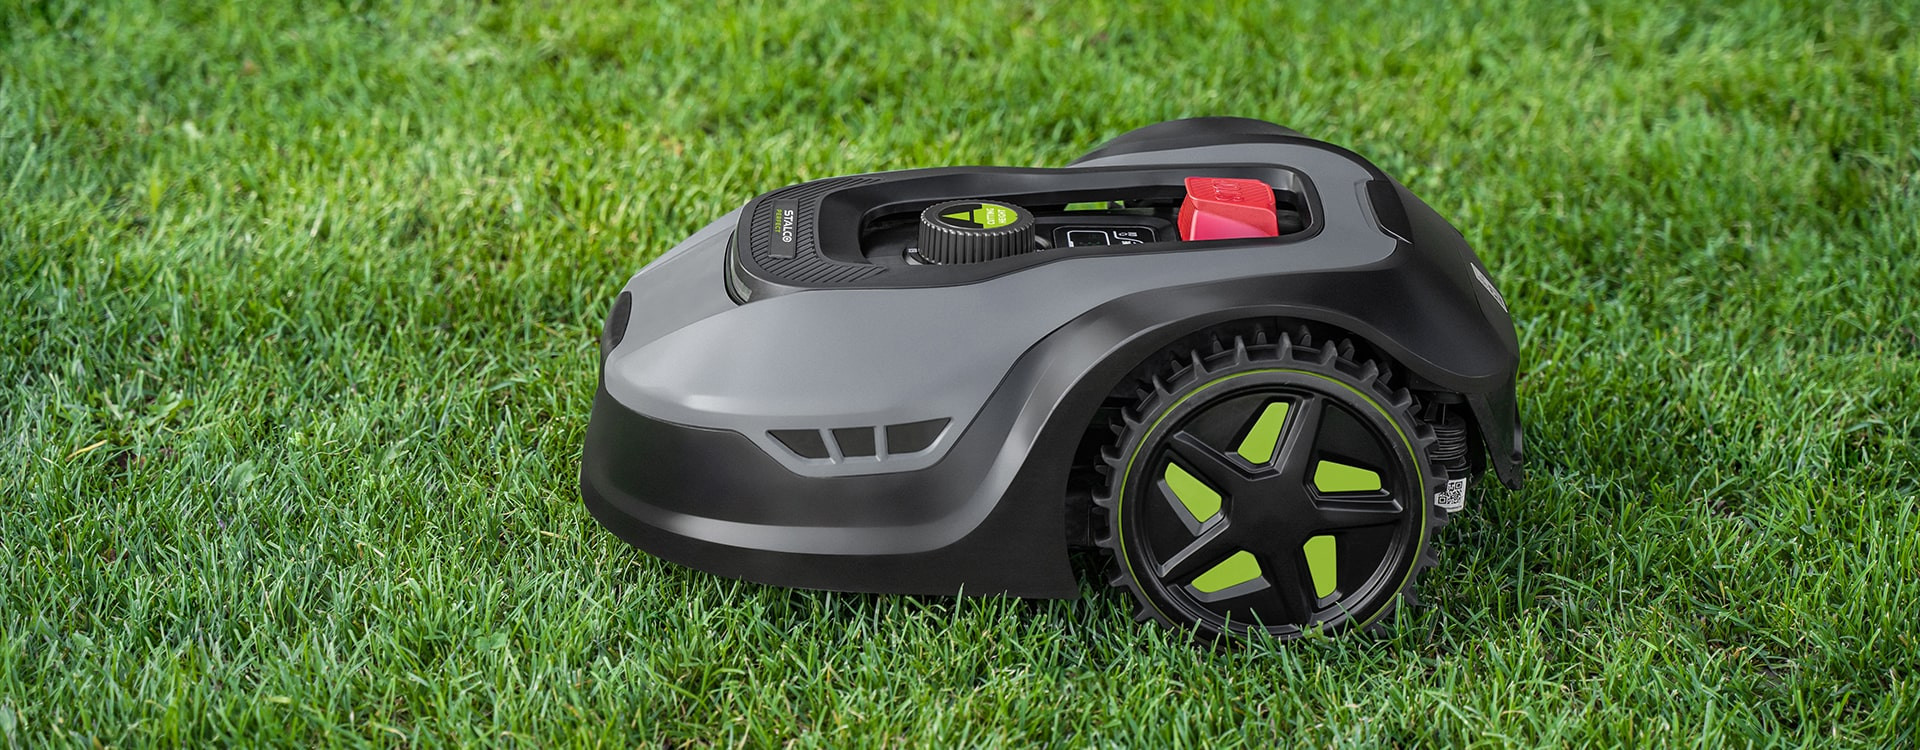 Mowing robots – how do they work and what are their advantages?